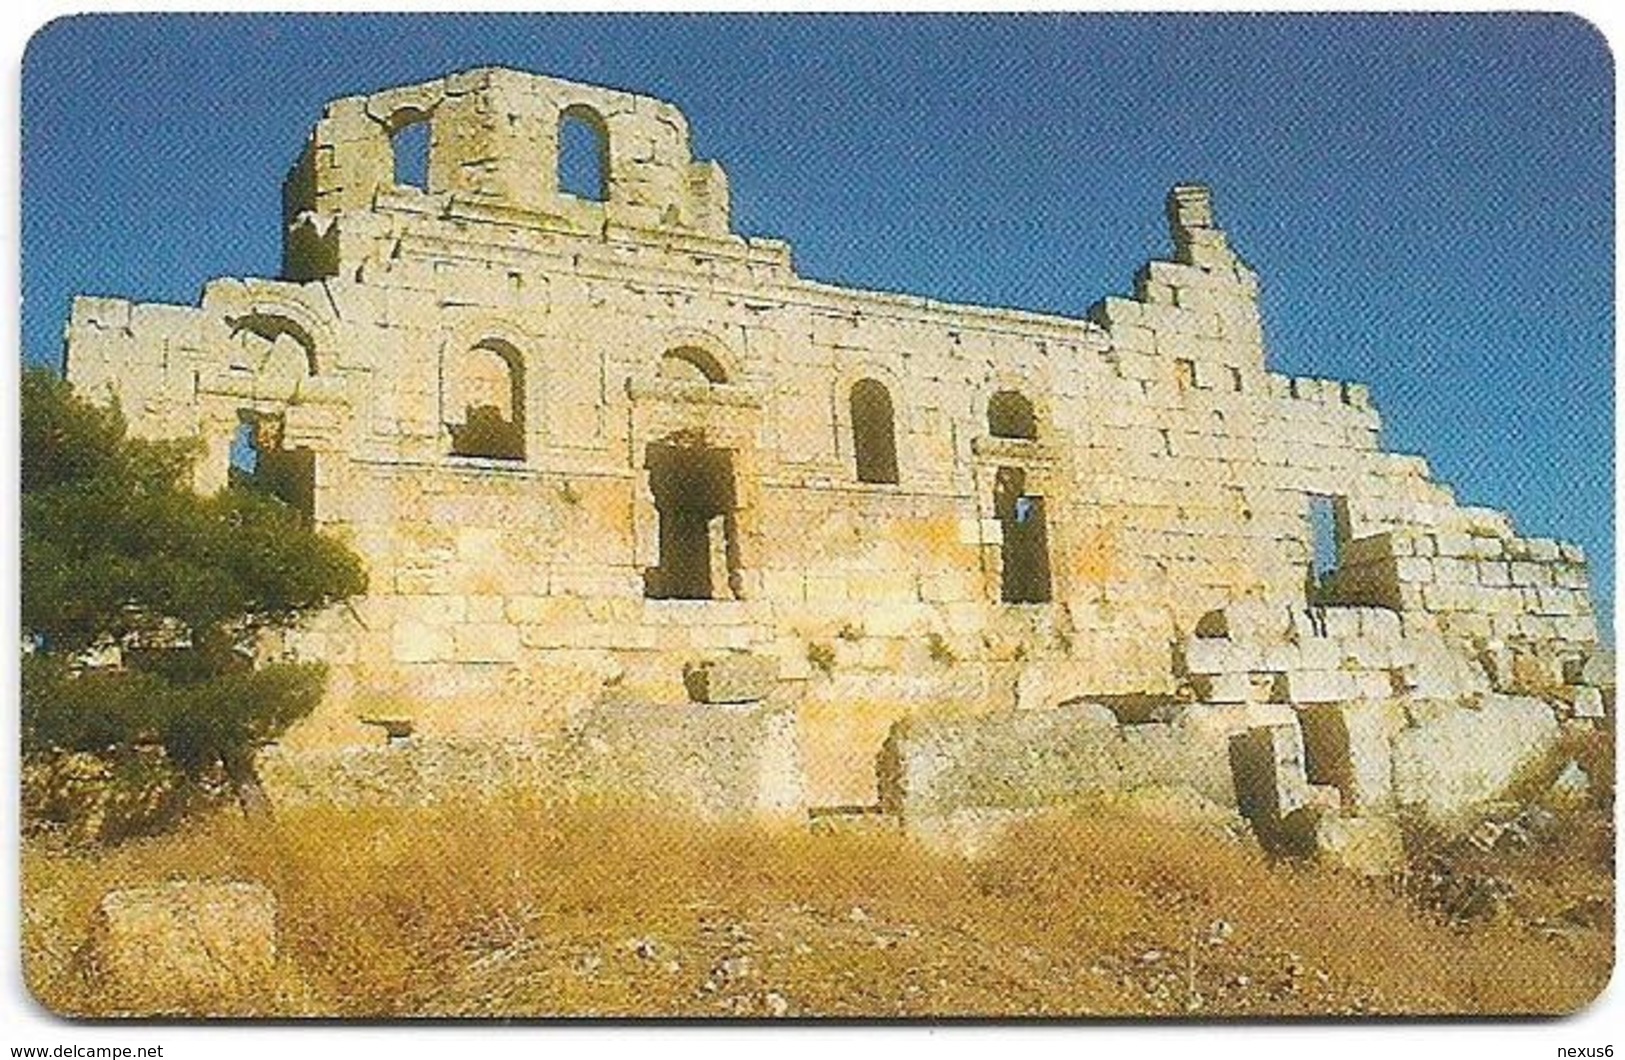 Syria - STE (Chip) - Old Ruins, Cn. 1NGCJCD, 2006, 500SP, Used - Syria